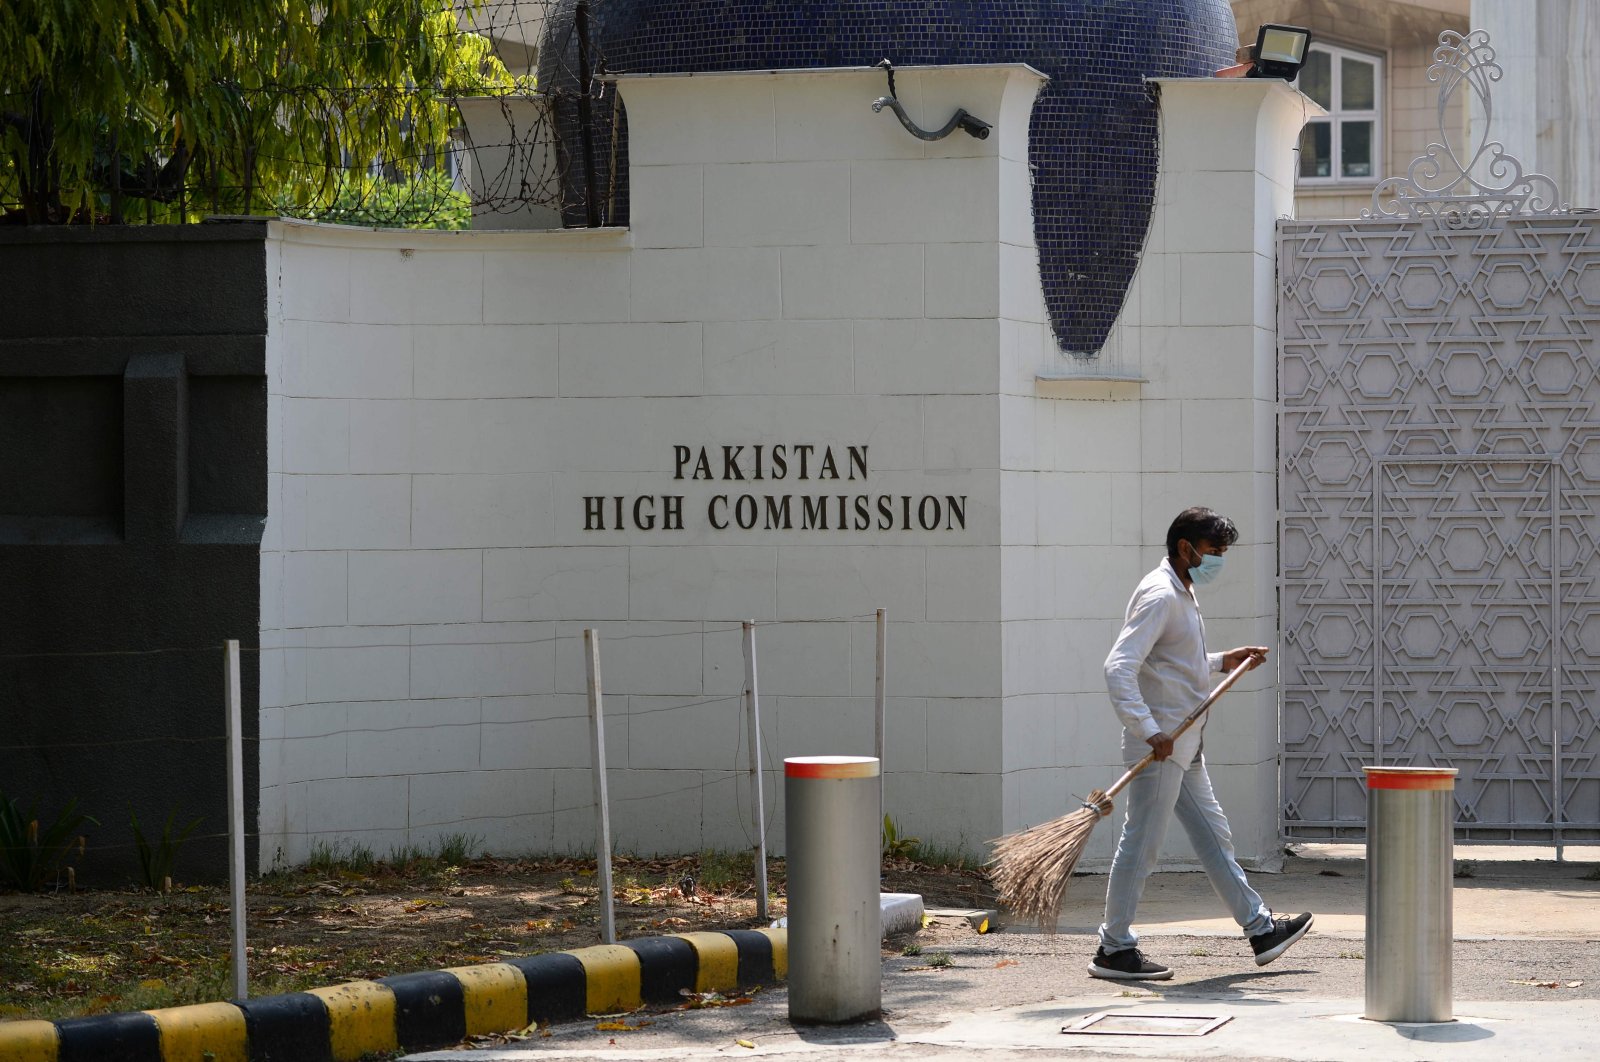 A man sweeps in front of the main gate of the Pakistan High Commission, New Delhi, June 1, 2020. (AFP Photo)